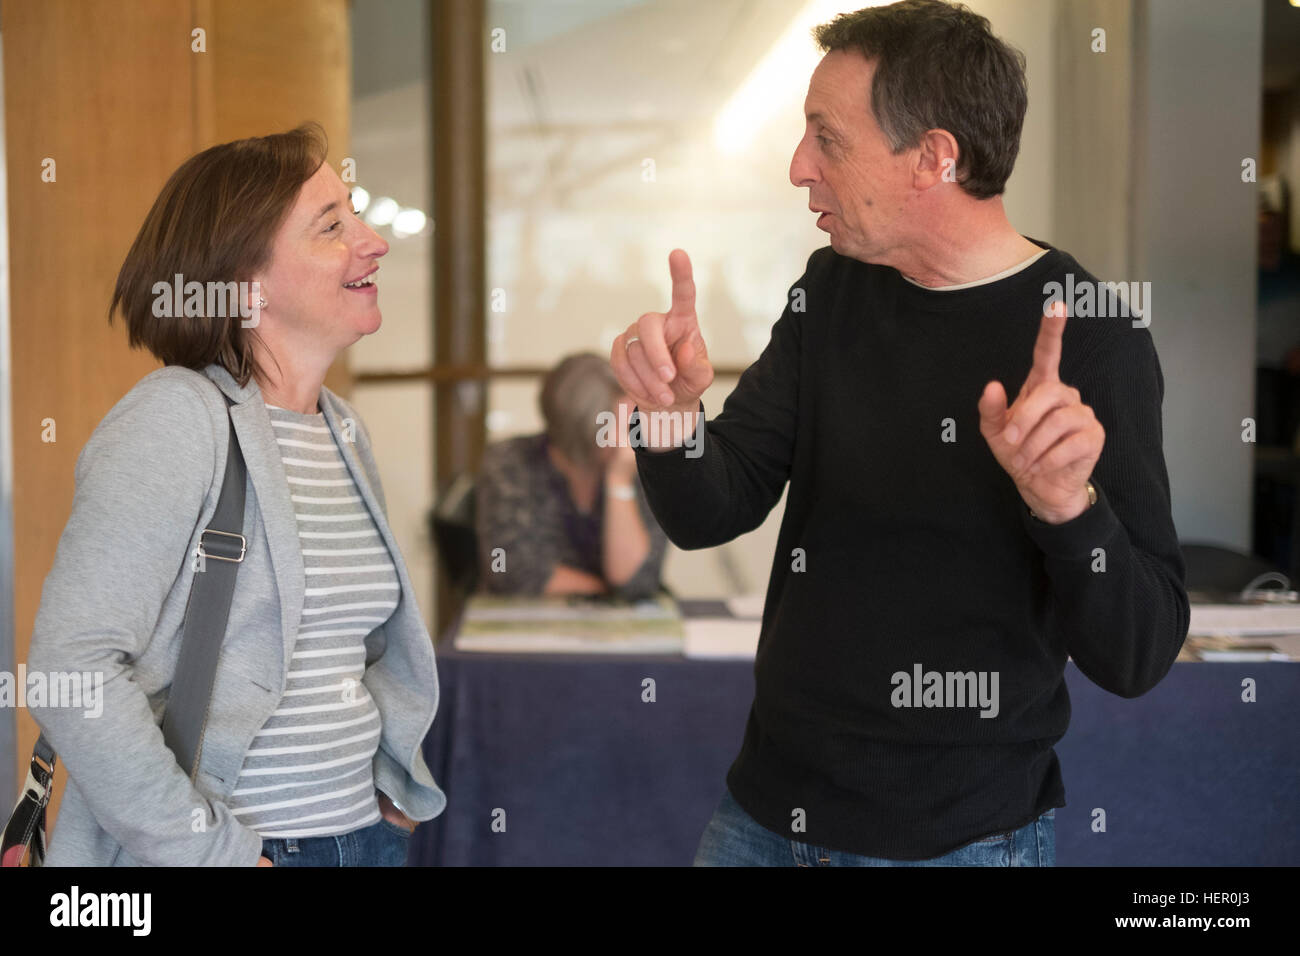 Sophe Batterbury (L), picture editor of The I newspaper, speaking with photojournailst Nick Treharne (R)The Eye Festival of Documentary photography, Aberystwyth Arts Centre, Wales UK, 2016 Stock Photo